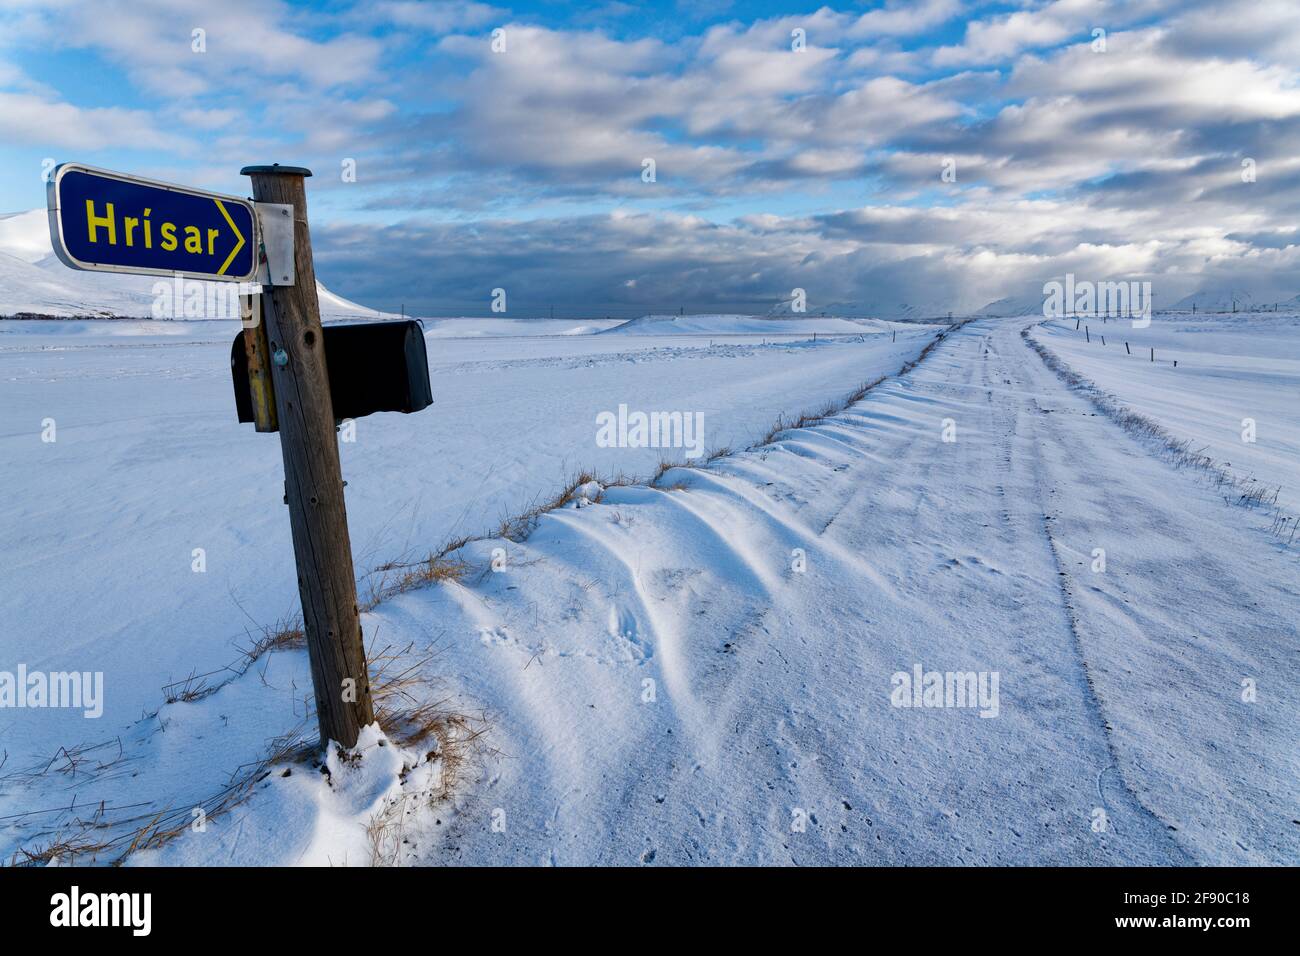 Road sign and road covered in snow in winter, Dalvik, Iceland Stock Photo